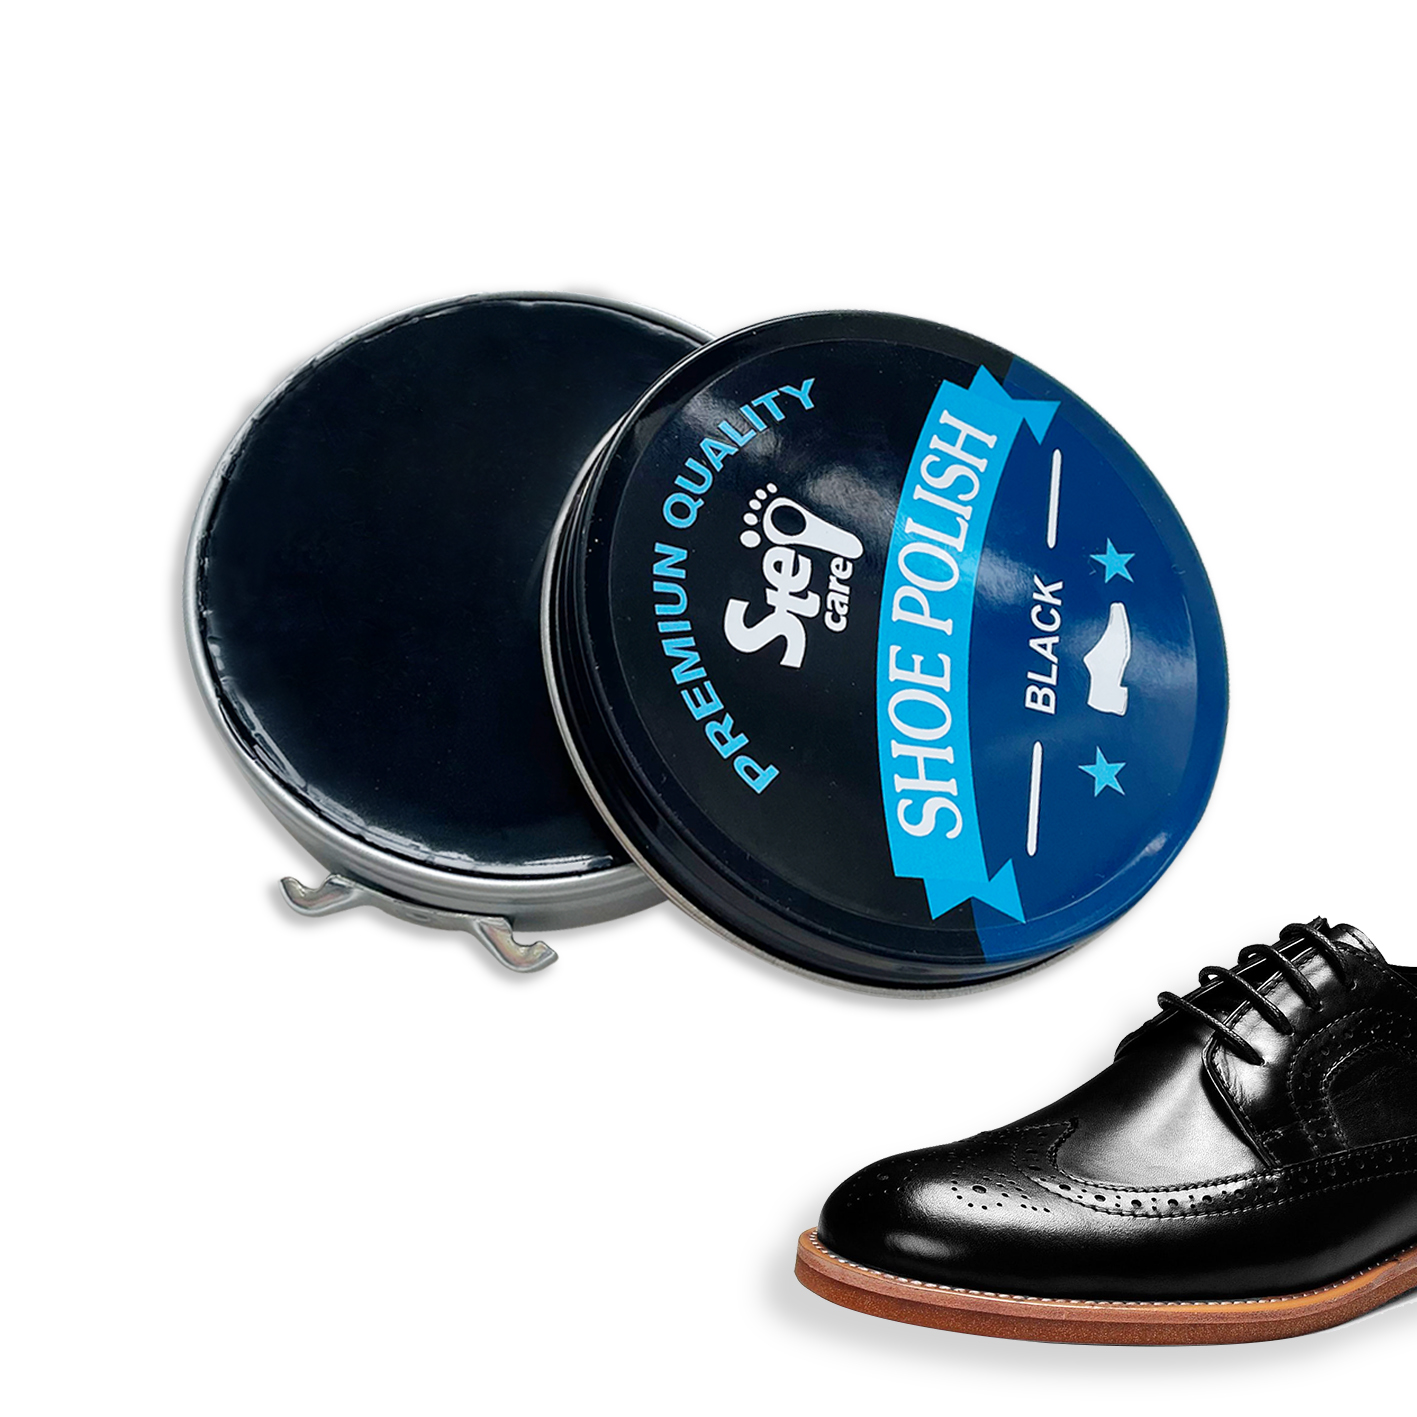 Quick Shoe Shine for leather shoes, best way to shine shoes